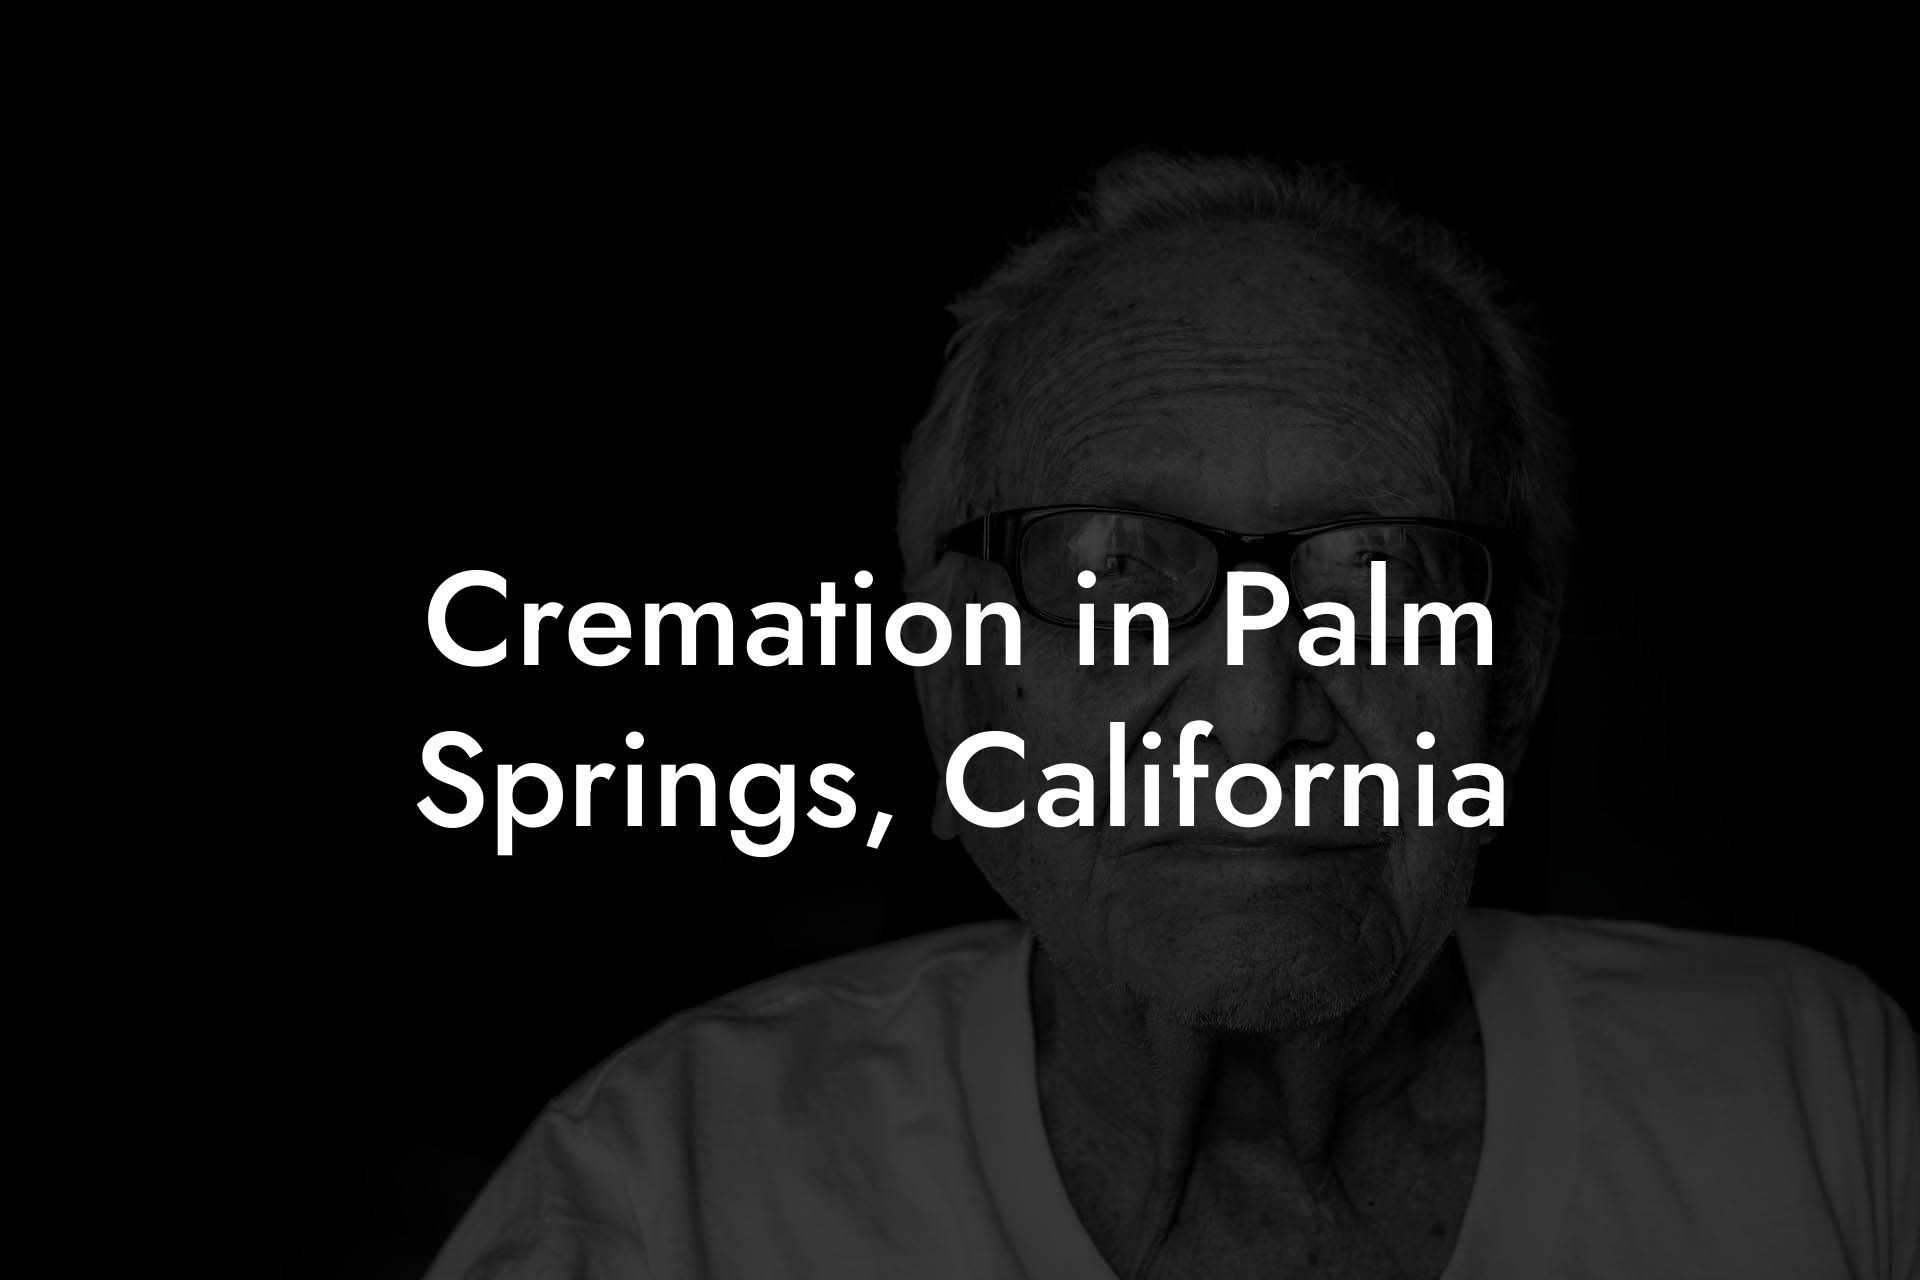 Cremation in Palm Springs, California